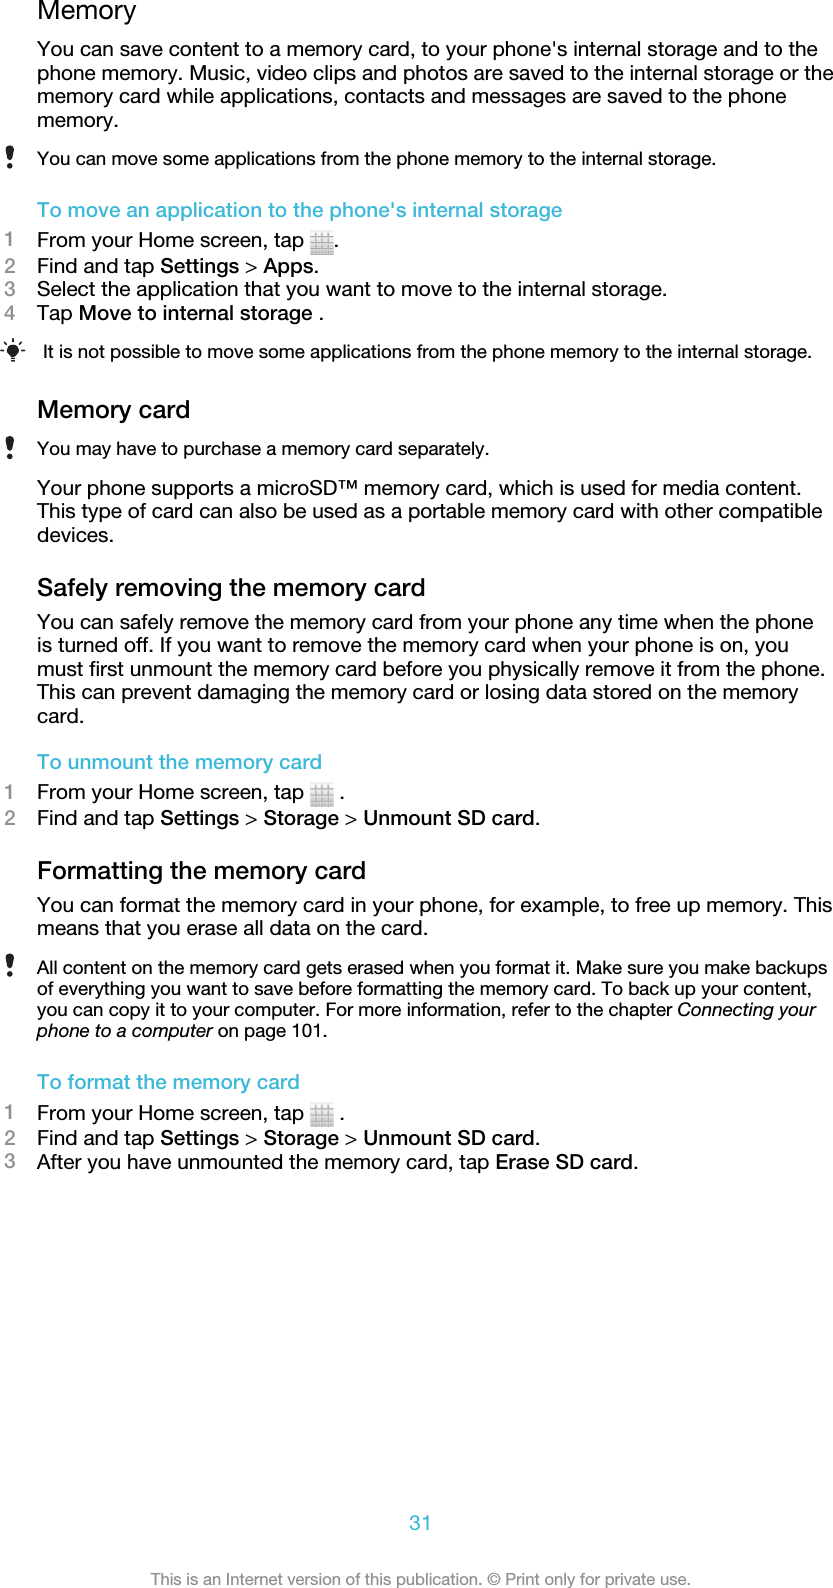 MemoryYou can save content to a memory card, to your phone&apos;s internal storage and to thephone memory. Music, video clips and photos are saved to the internal storage or thememory card while applications, contacts and messages are saved to the phonememory.You can move some applications from the phone memory to the internal storage.To move an application to the phone&apos;s internal storage1From your Home screen, tap  .2Find and tap Settings &gt; Apps.3Select the application that you want to move to the internal storage.4Tap Move to internal storage .It is not possible to move some applications from the phone memory to the internal storage.Memory cardYou may have to purchase a memory card separately.Your phone supports a microSD™ memory card, which is used for media content.This type of card can also be used as a portable memory card with other compatibledevices.Safely removing the memory cardYou can safely remove the memory card from your phone any time when the phoneis turned off. If you want to remove the memory card when your phone is on, youmust first unmount the memory card before you physically remove it from the phone.This can prevent damaging the memory card or losing data stored on the memorycard.To unmount the memory card1From your Home screen, tap   .2Find and tap Settings &gt; Storage &gt; Unmount SD card.Formatting the memory cardYou can format the memory card in your phone, for example, to free up memory. Thismeans that you erase all data on the card.All content on the memory card gets erased when you format it. Make sure you make backupsof everything you want to save before formatting the memory card. To back up your content,you can copy it to your computer. For more information, refer to the chapter Connecting yourphone to a computer on page 101.To format the memory card1From your Home screen, tap   .2Find and tap Settings &gt; Storage &gt; Unmount SD card.3After you have unmounted the memory card, tap Erase SD card.31This is an Internet version of this publication. © Print only for private use.